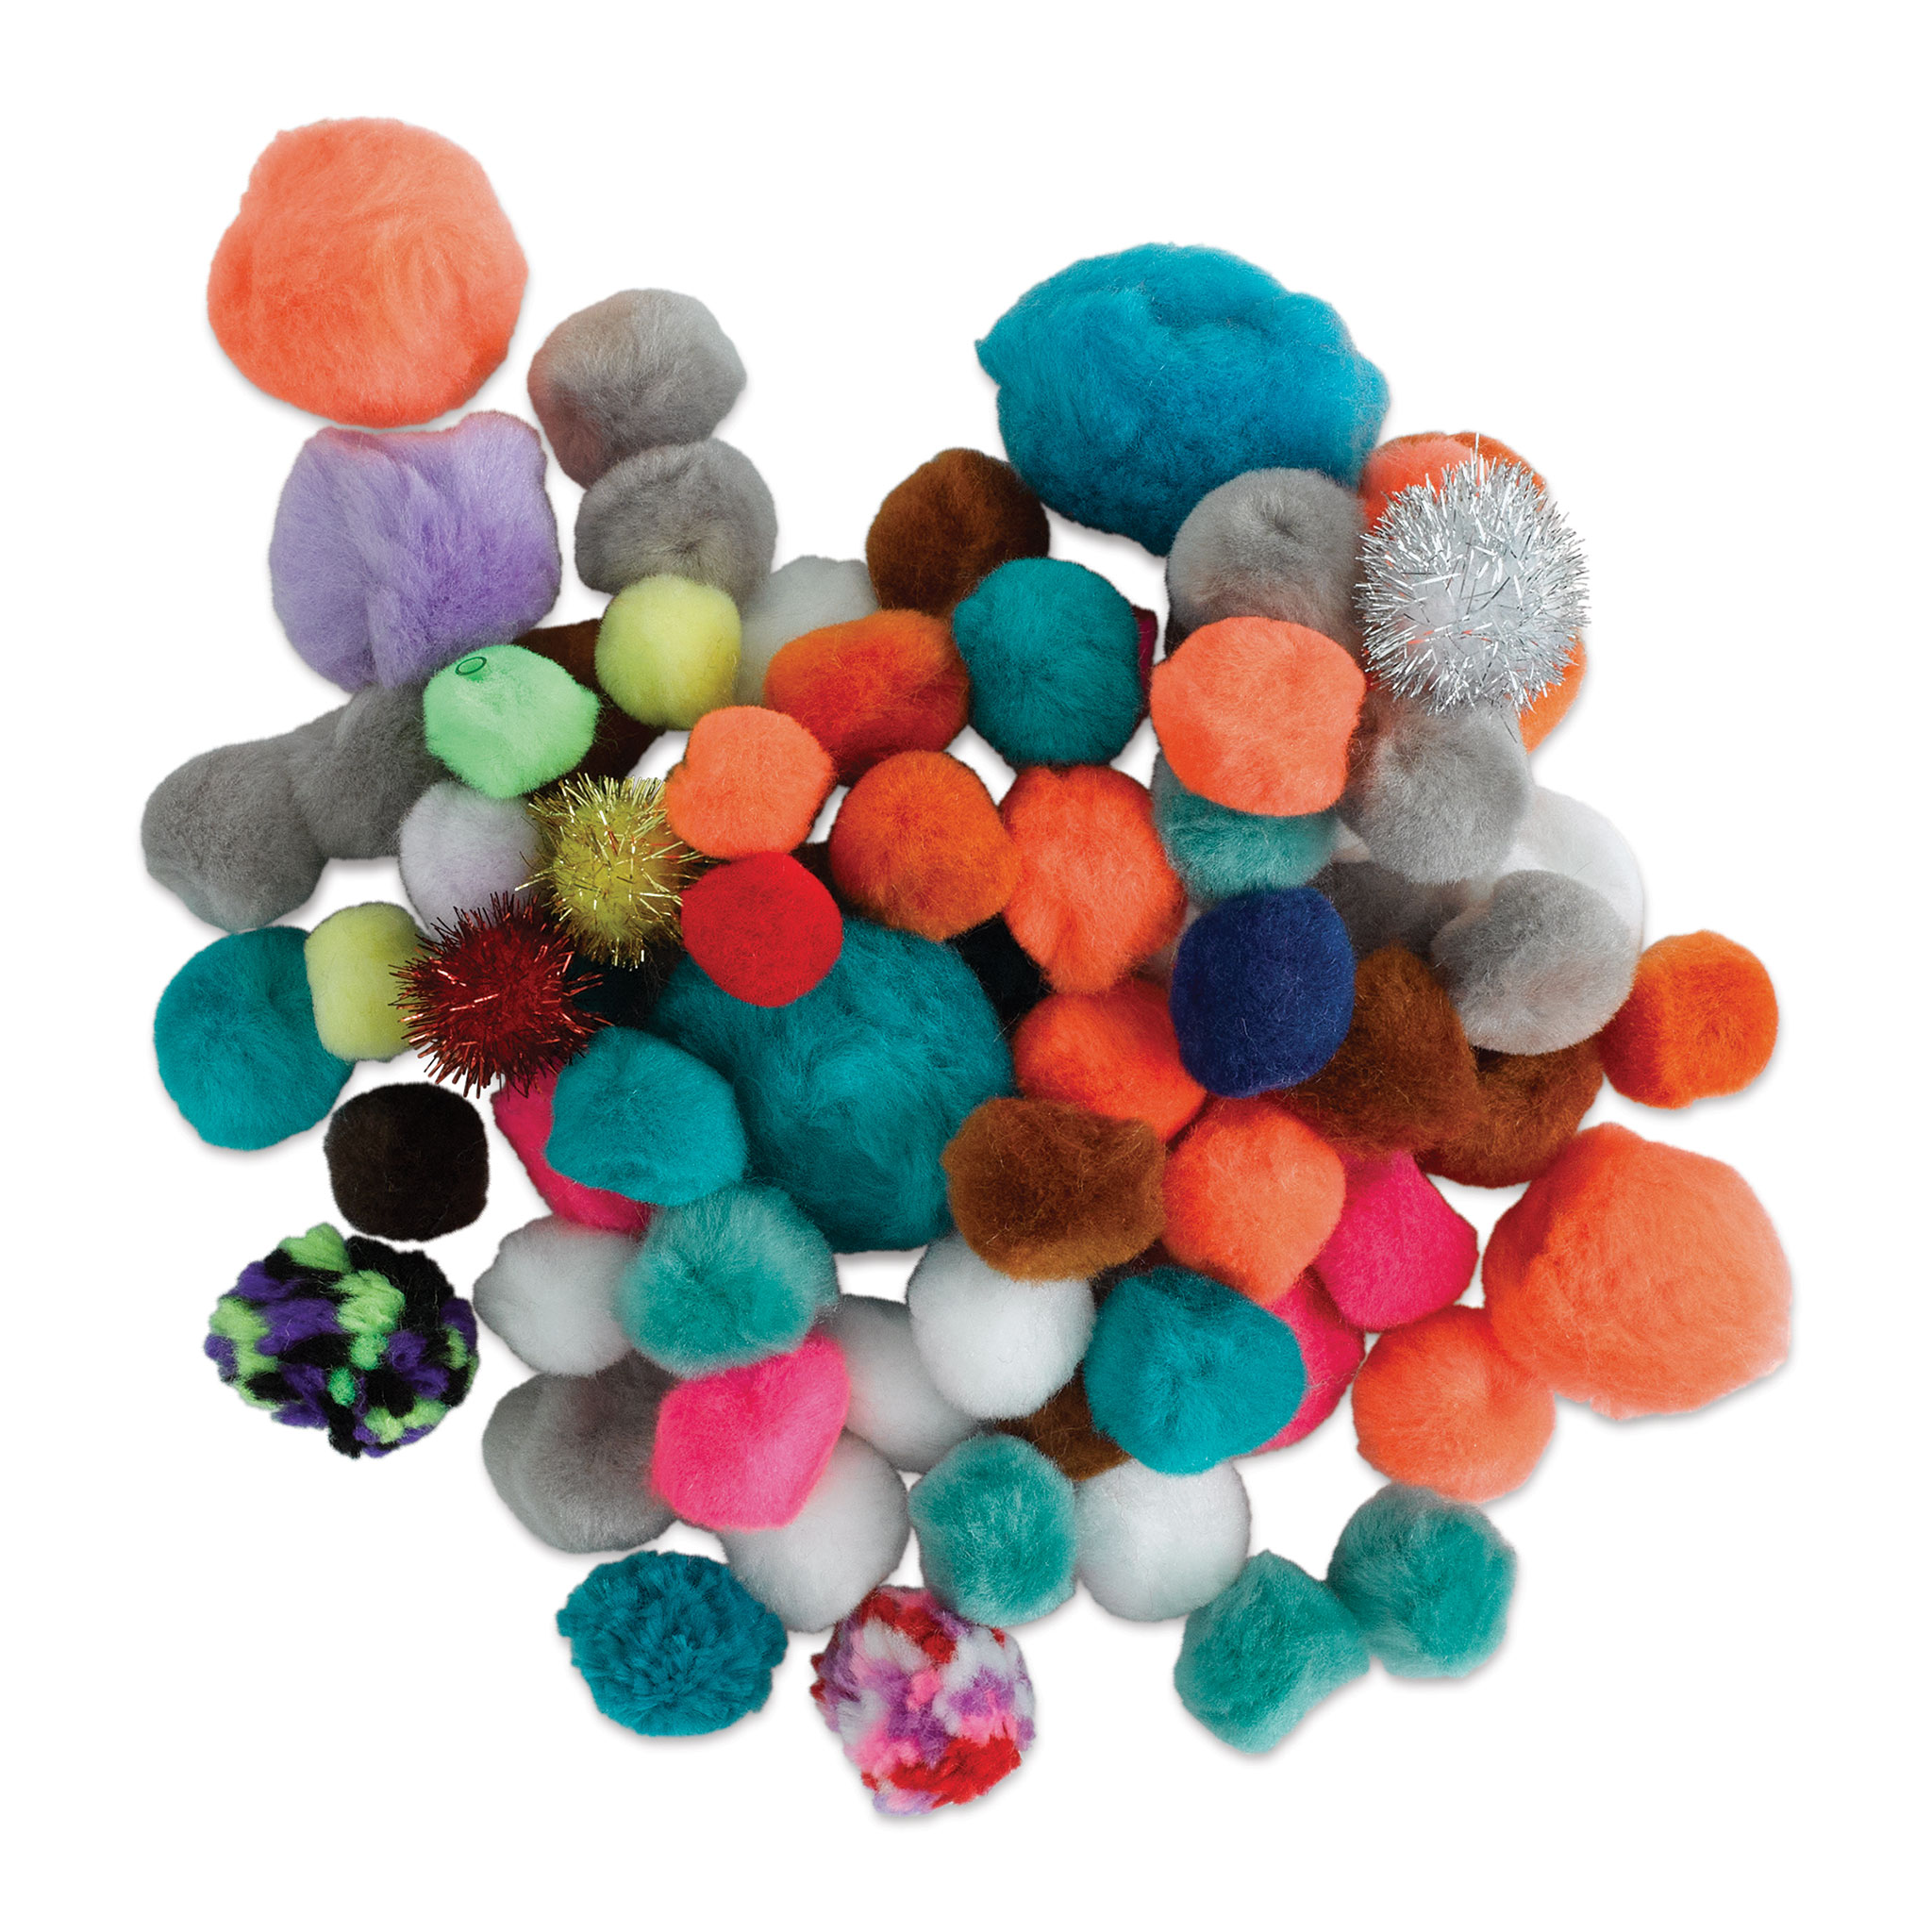 8 mm Approx. 500 Pieces Colourful Mini Pompoms for Crafts Felt Balls  Colourful Pom Poms Small Pom Poms Fluffy Plush Balls for Decorating Sewing  DIY Creative Crafts Green A : : Home